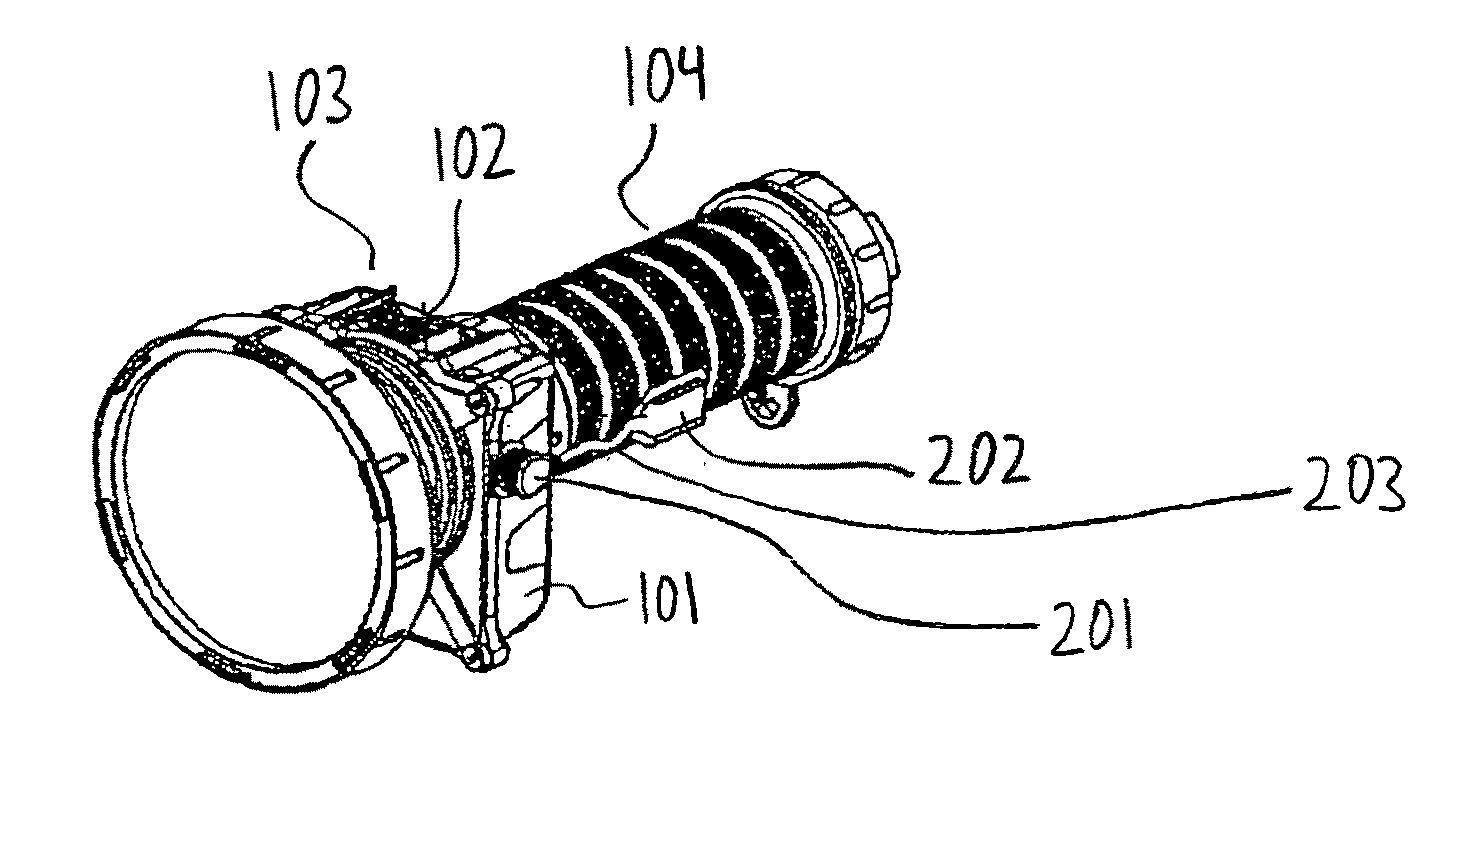 Reed and pressure switching system for use in a lighting system